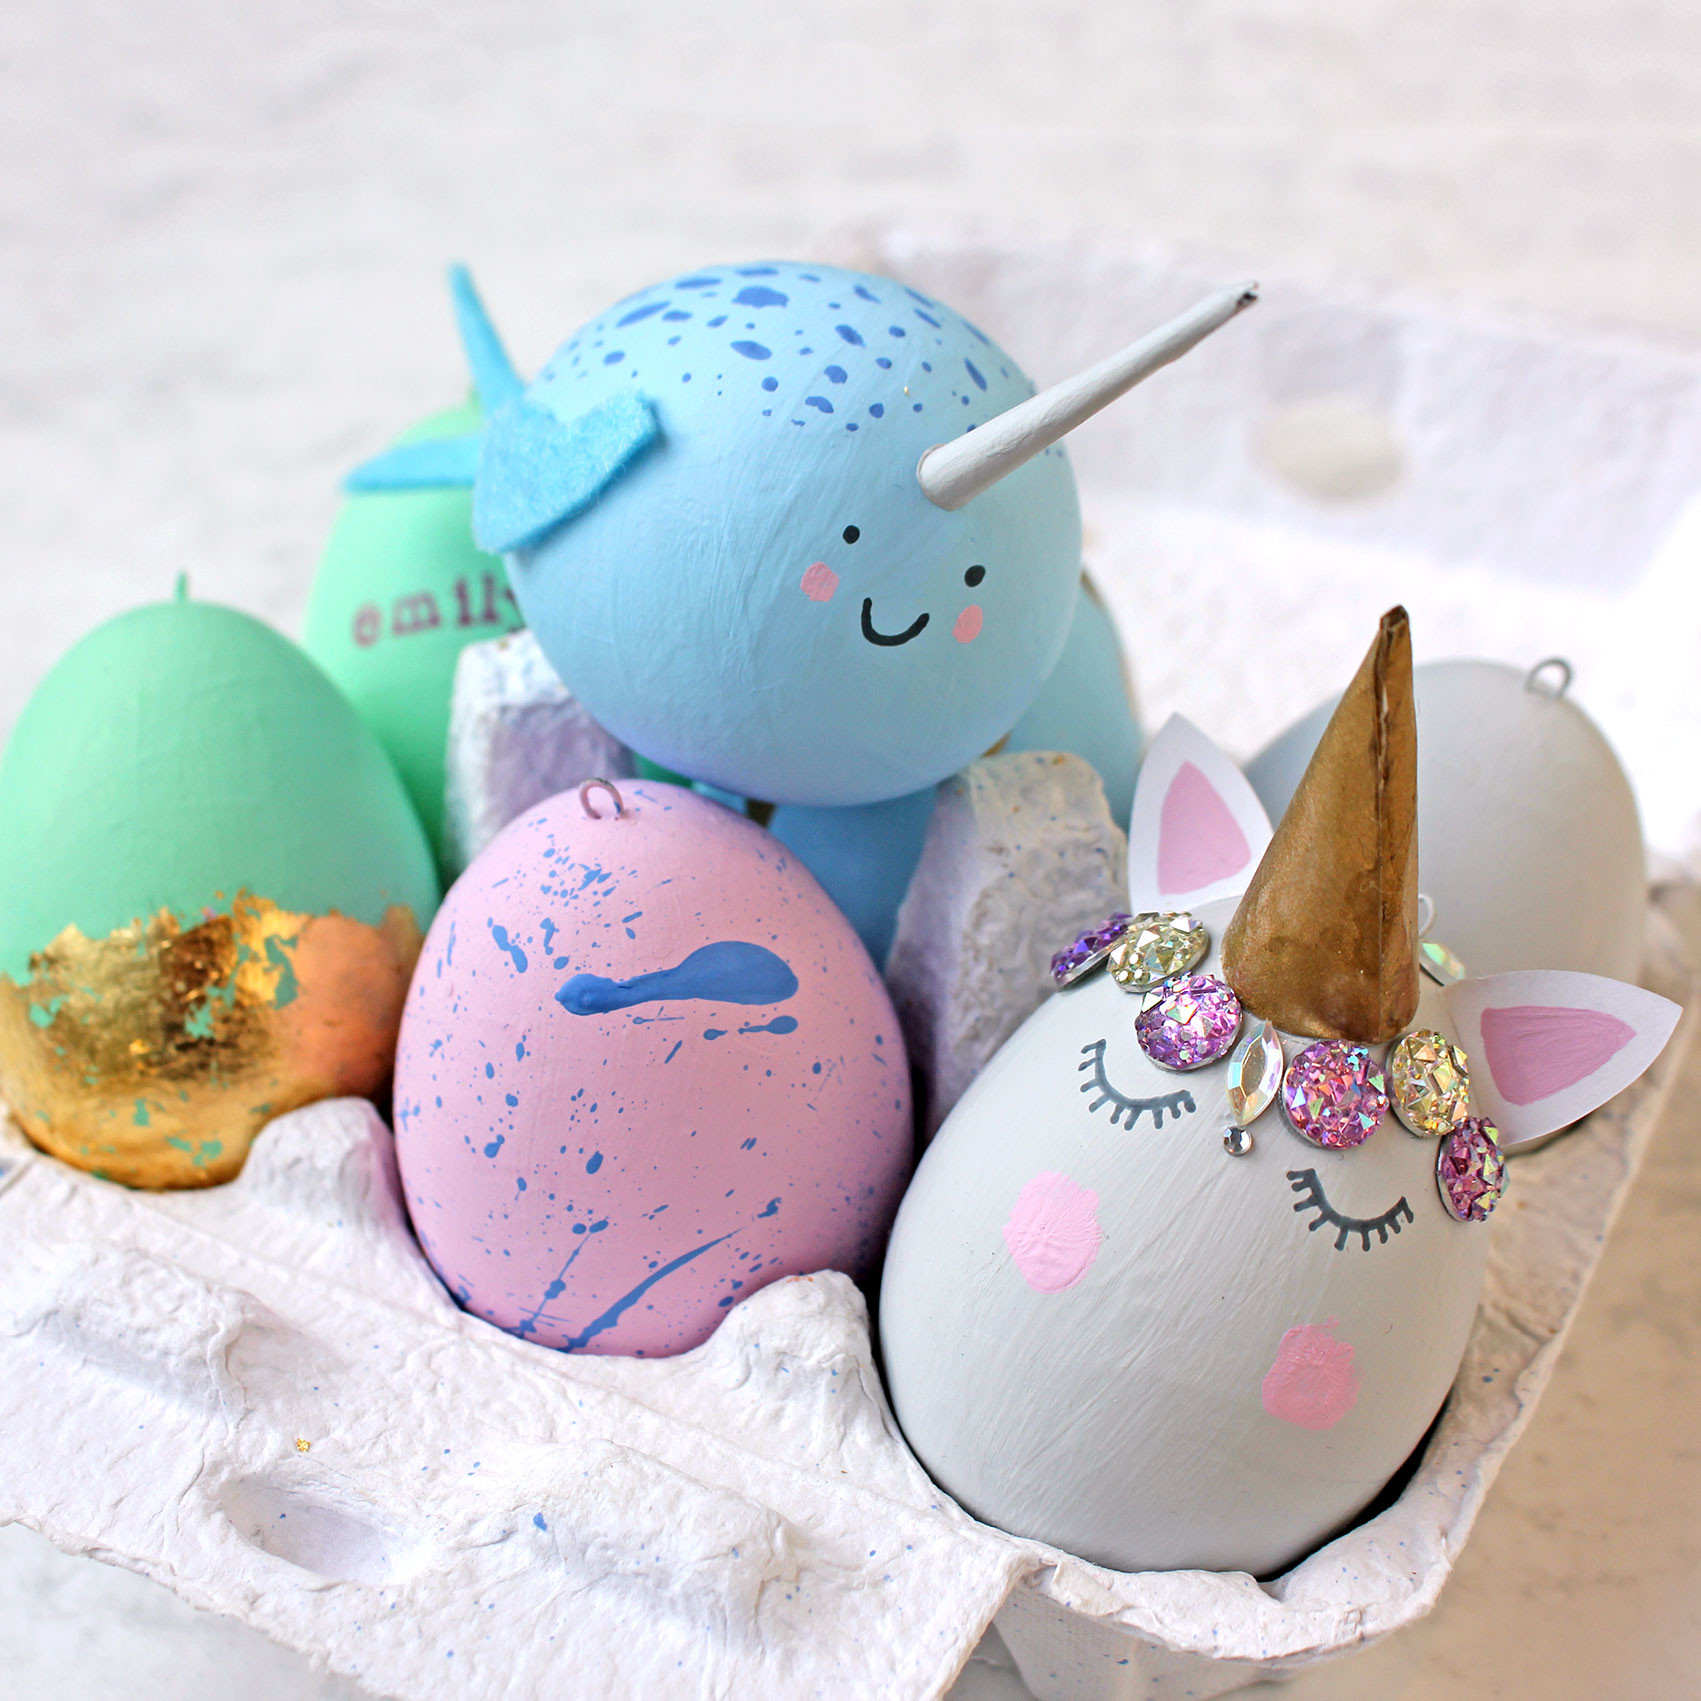 Easter Egg Decoration Ideas
 6 Different ways to decorate Easter Eggs